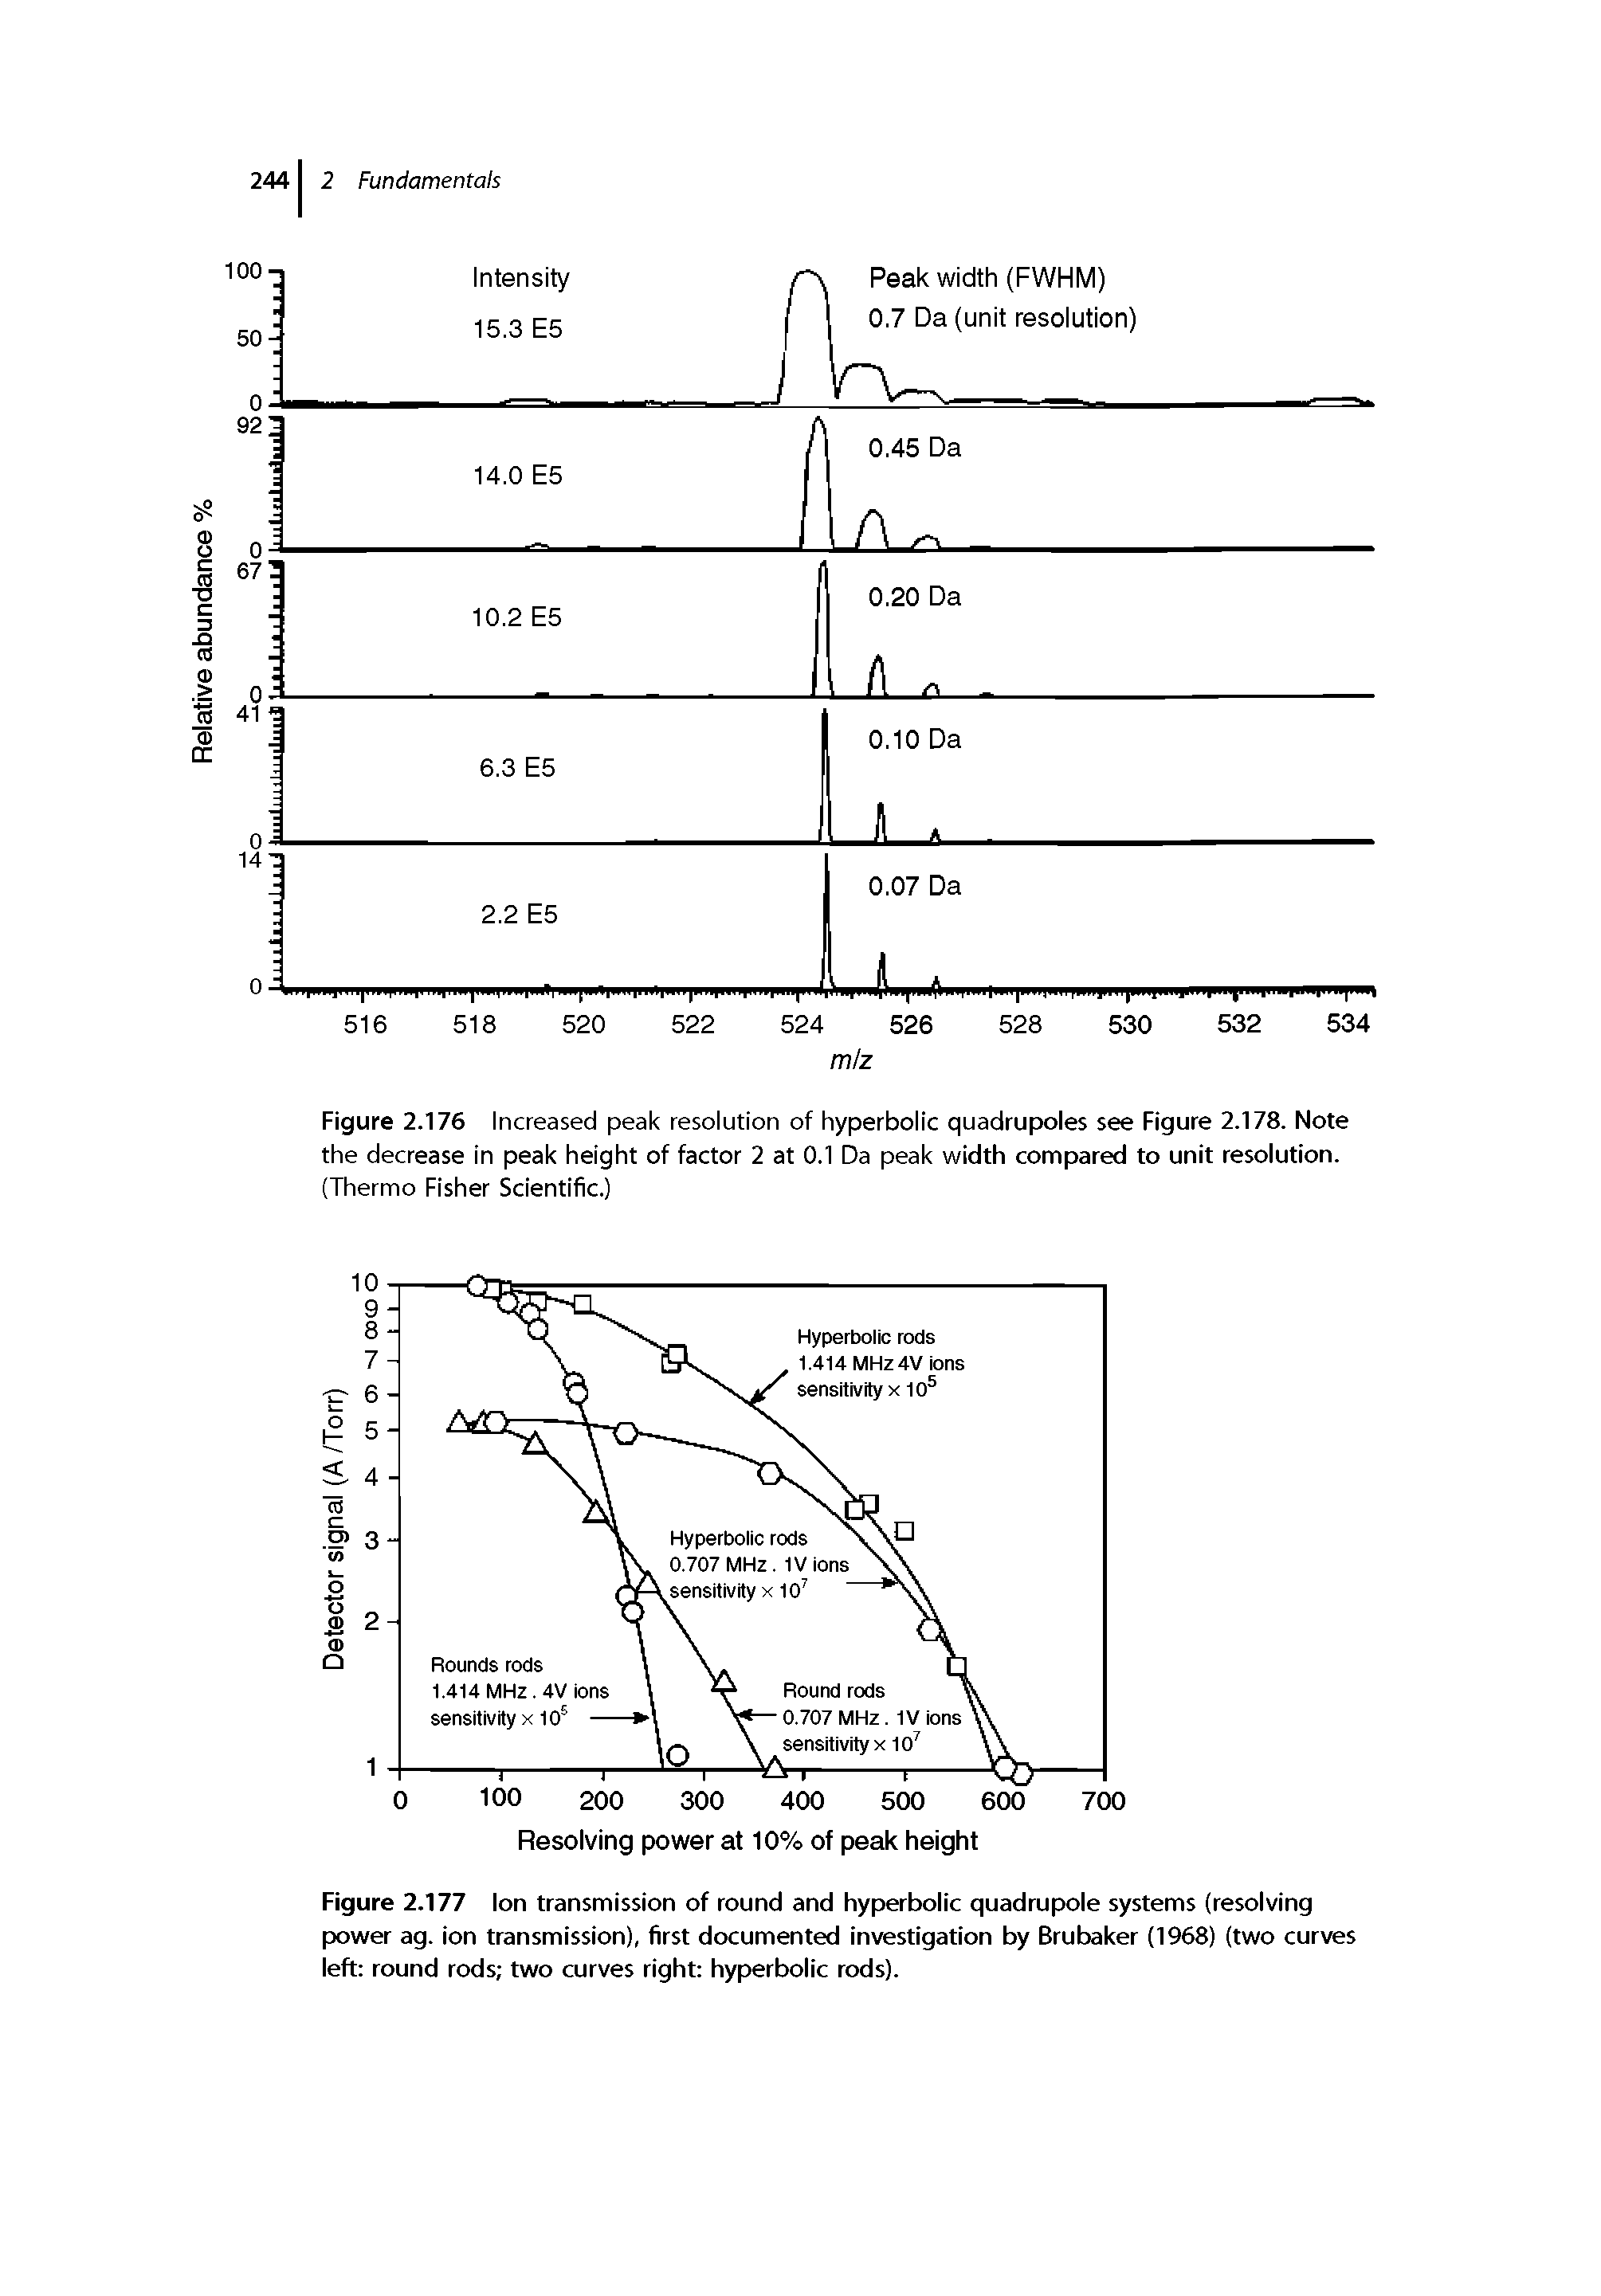 Figure 2.177 Ion transmission of round and hyperbolic quadrupole systems (resolving power ag. ion transmission), first documented investigation by Brubaker (1968) (two curves left round rods two curves right hyperbolic rods).